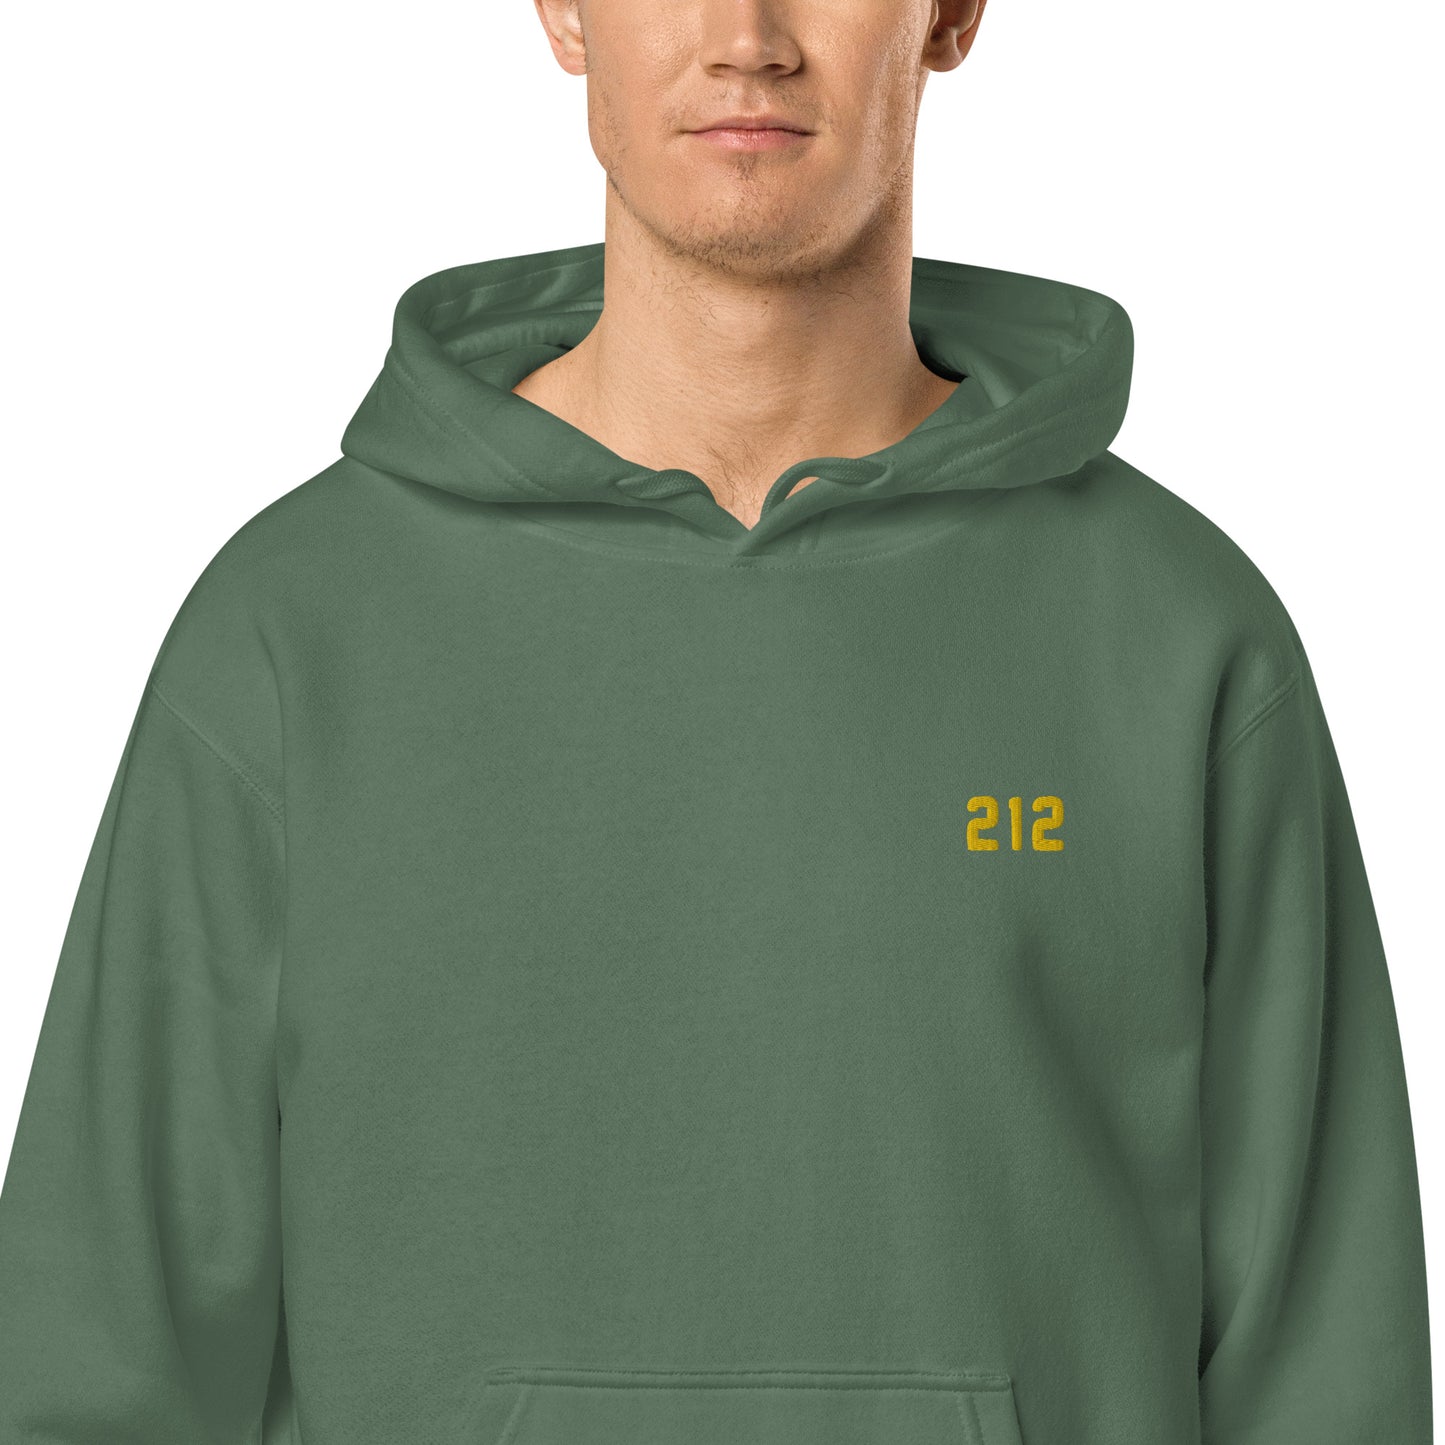 212 Embroidered Ivy League - Unisex pigment-dyed hoodie